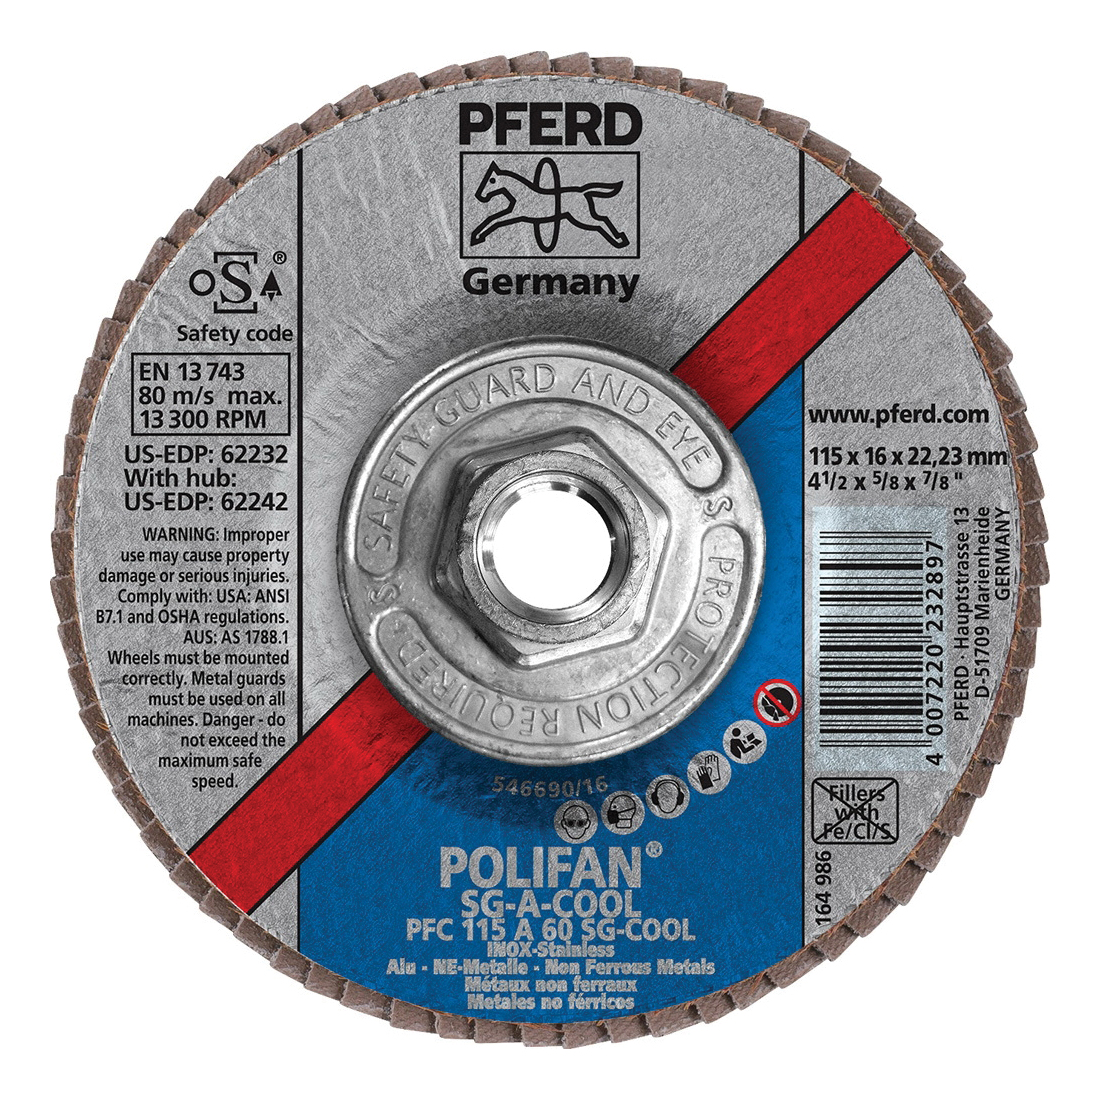 PFERD Polifan® 62242 Performance Line SG A-COOL Threaded Coated Abrasive Flap Disc, 4-1/2 in Dia, 60 Grit, Aluminum Oxide Abrasive, Type 29 Conical Disc